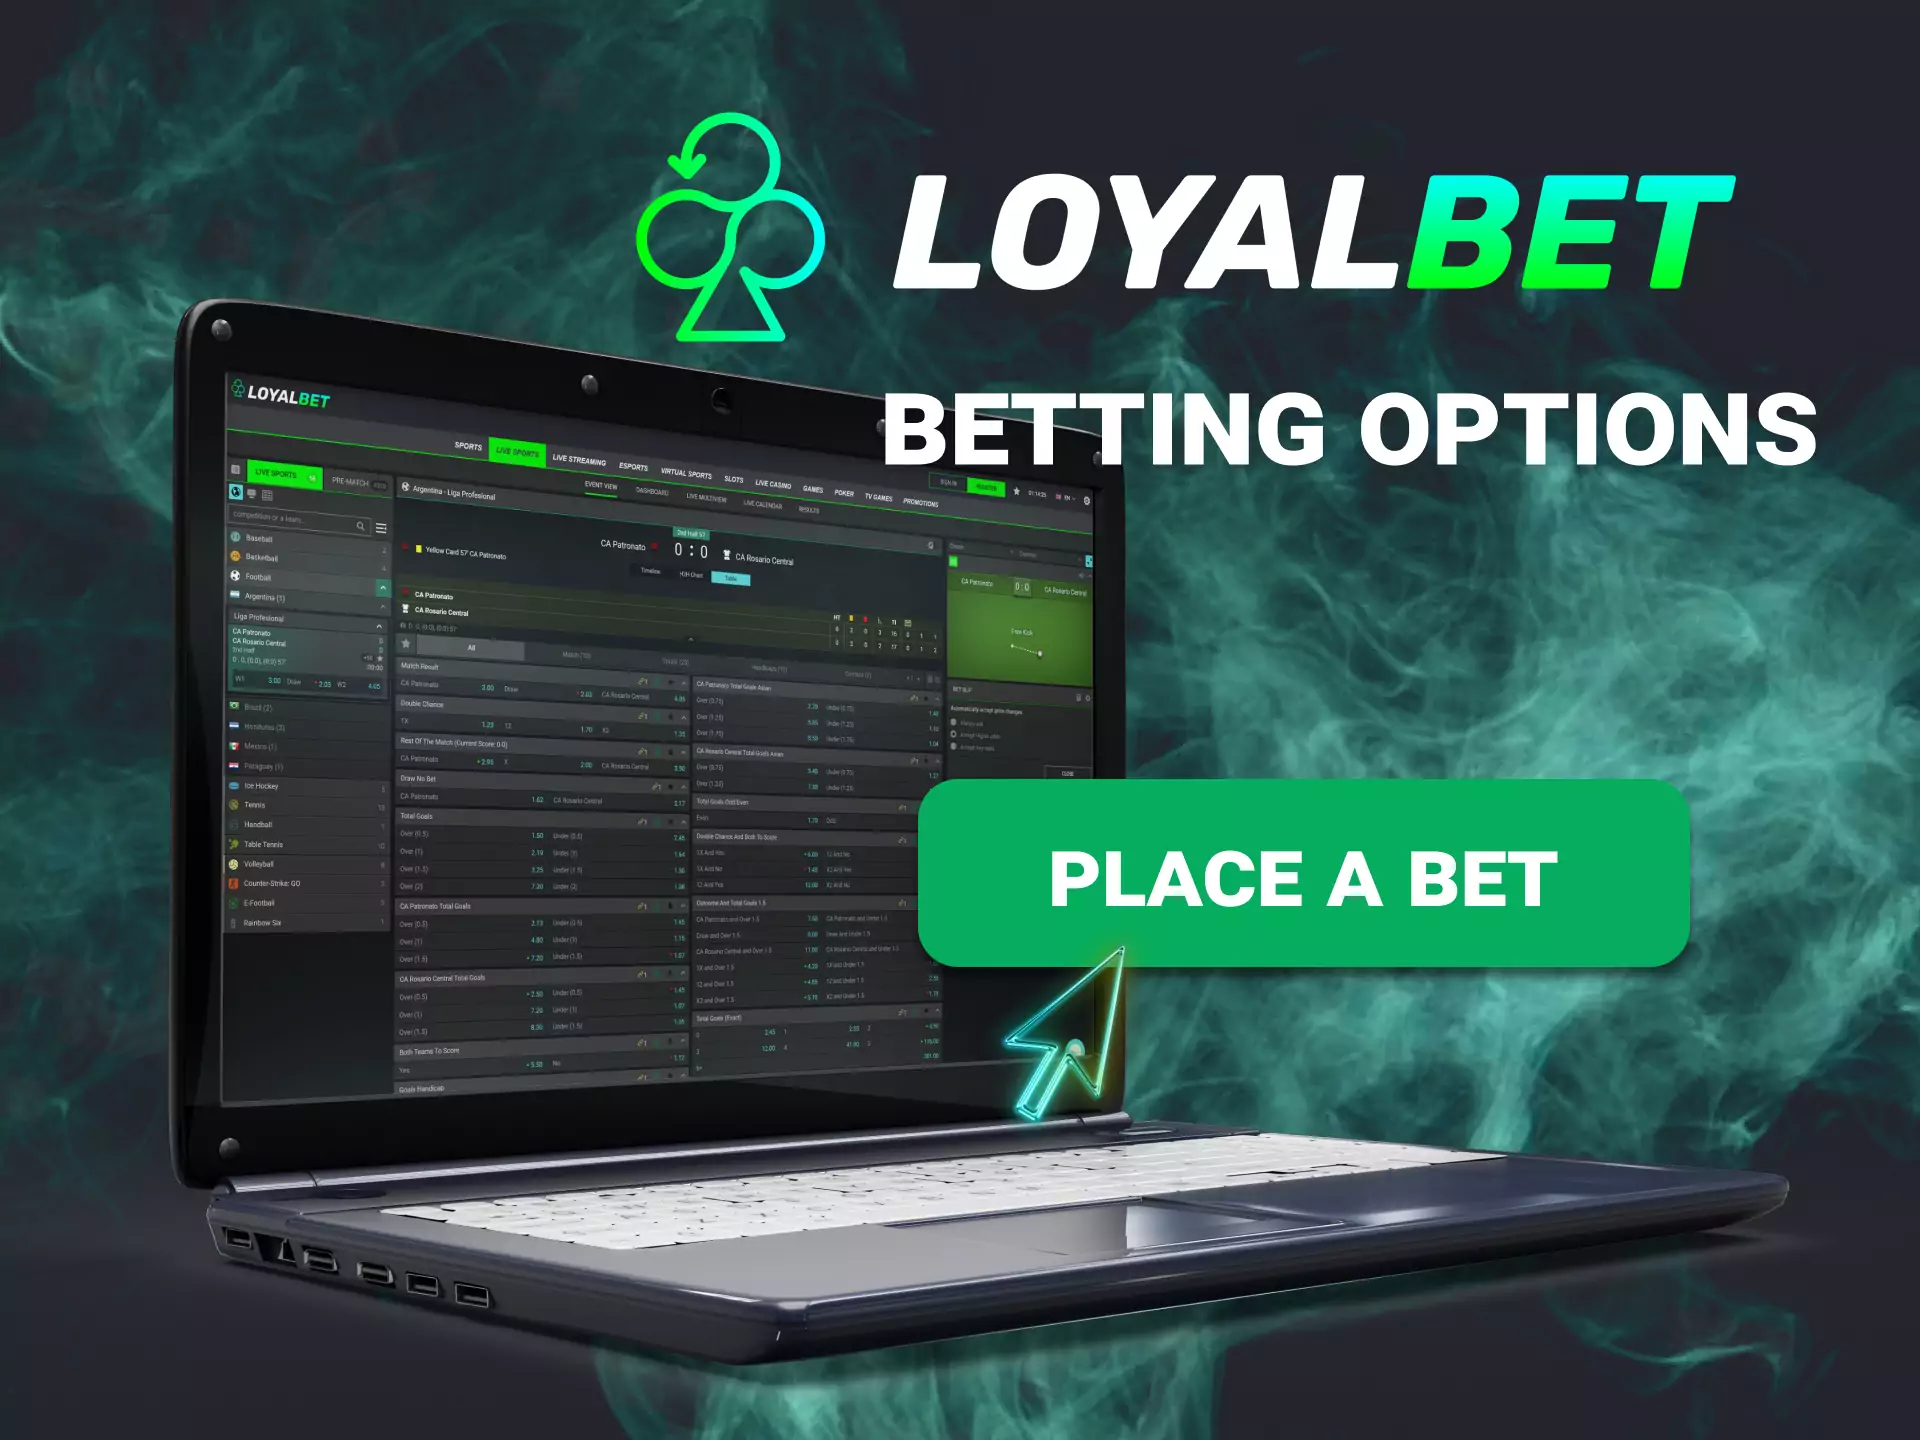 There are many options available for sports bettors on Loyalbet.